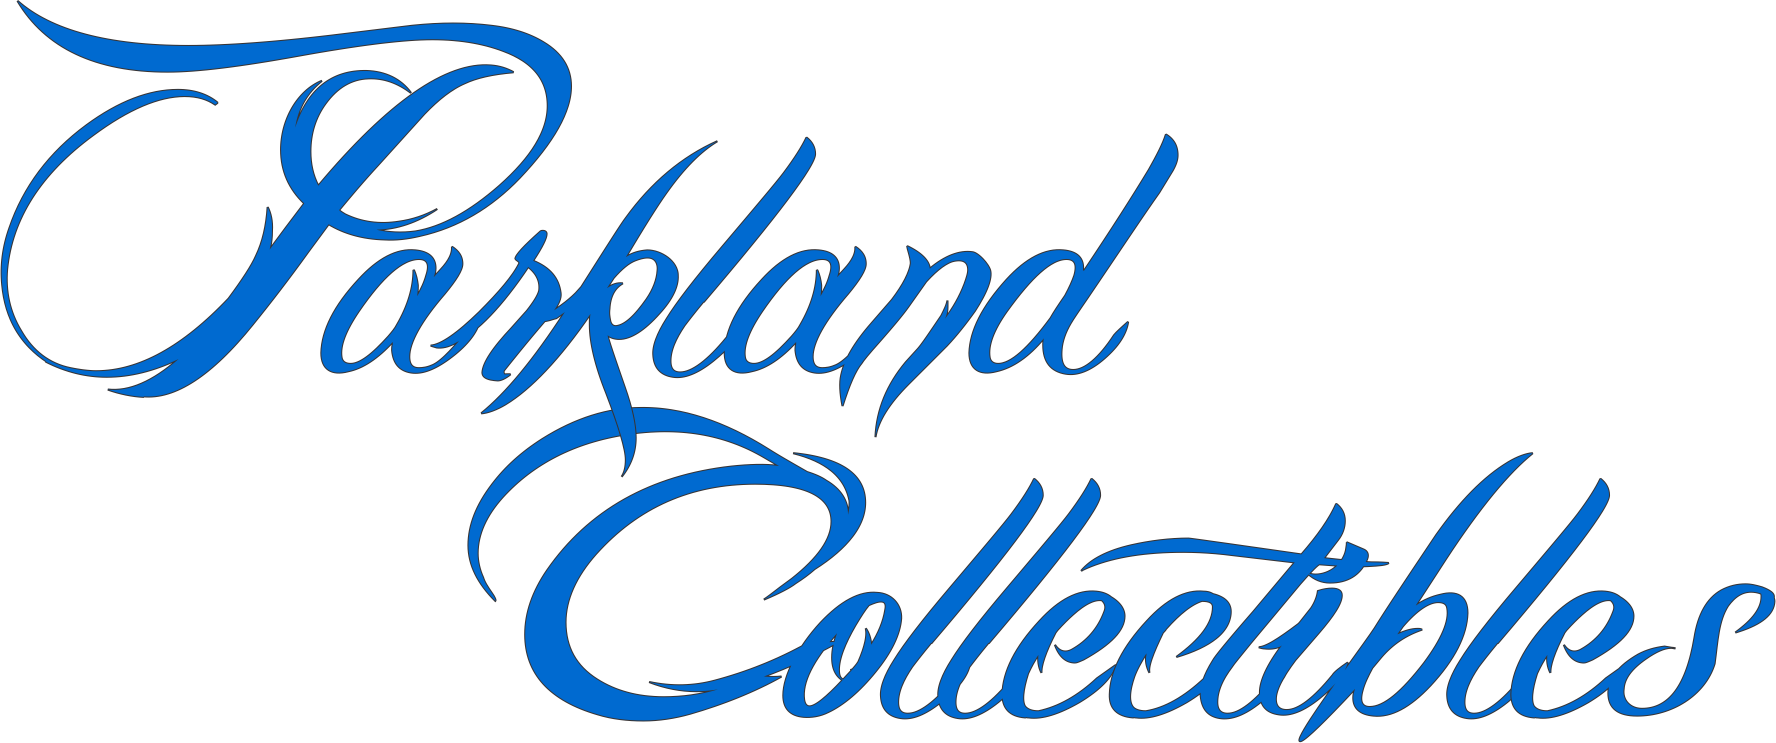 Parkland Collectibles - Custom printed pieces, unusual antiques and unique gifts.